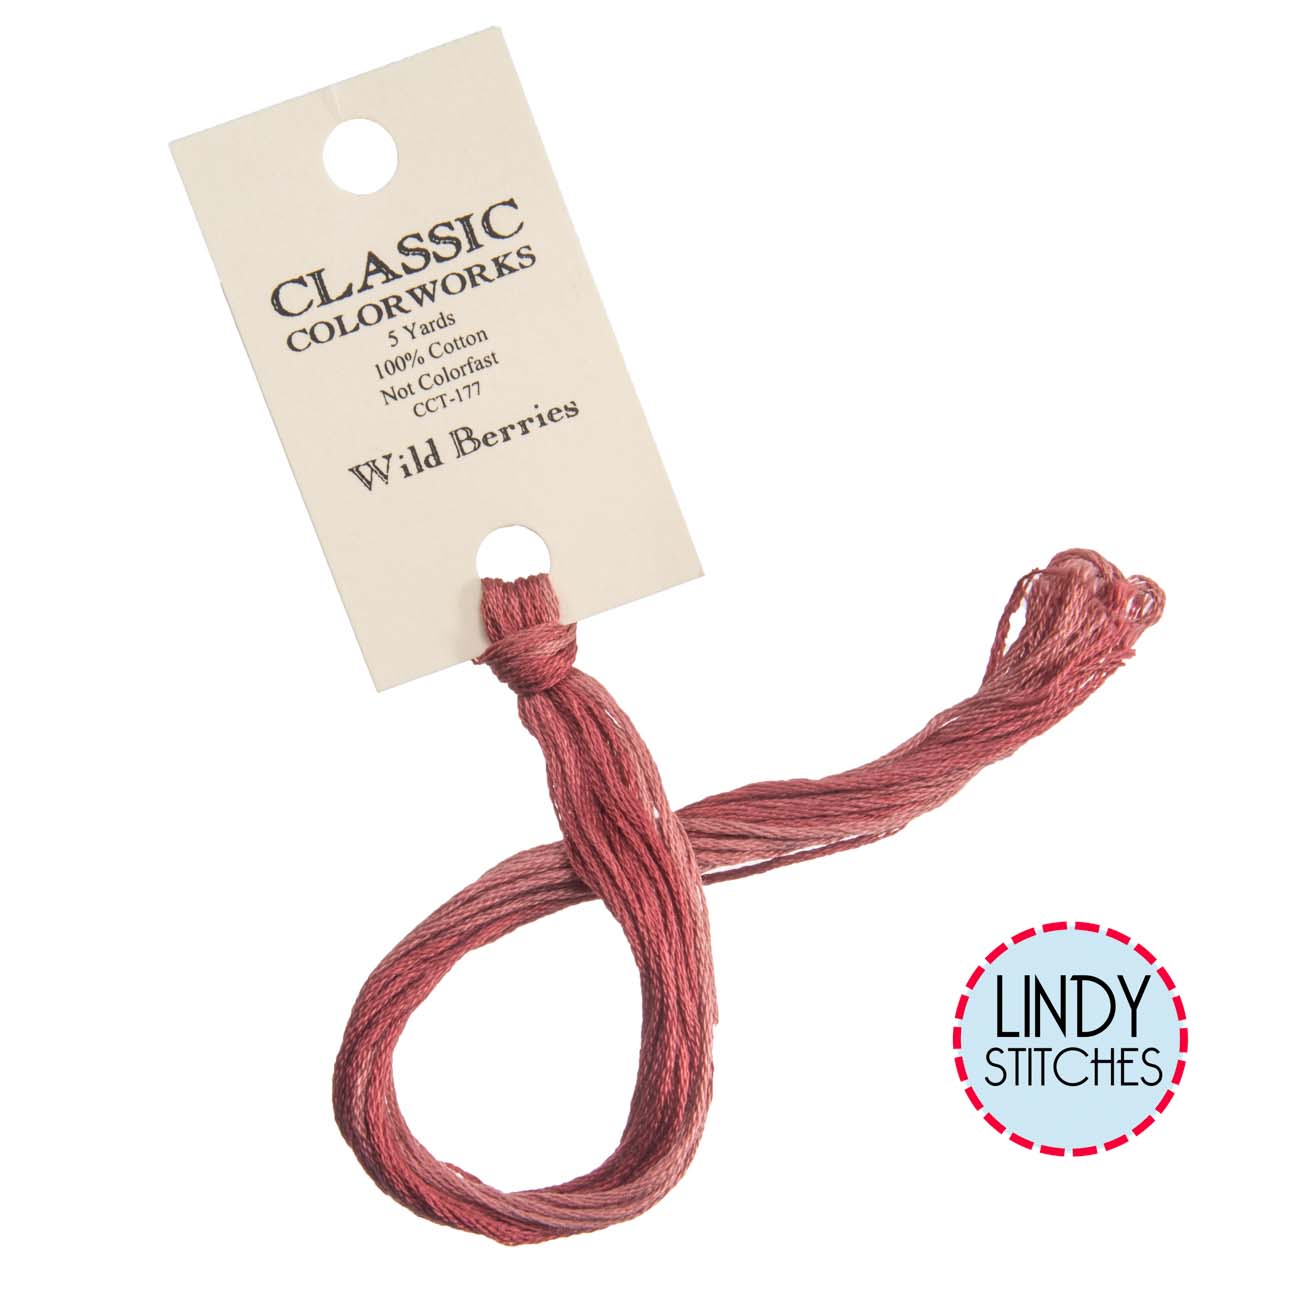 Wild Berries Classic Colorworks Floss Hand Dyed Cotton Skein